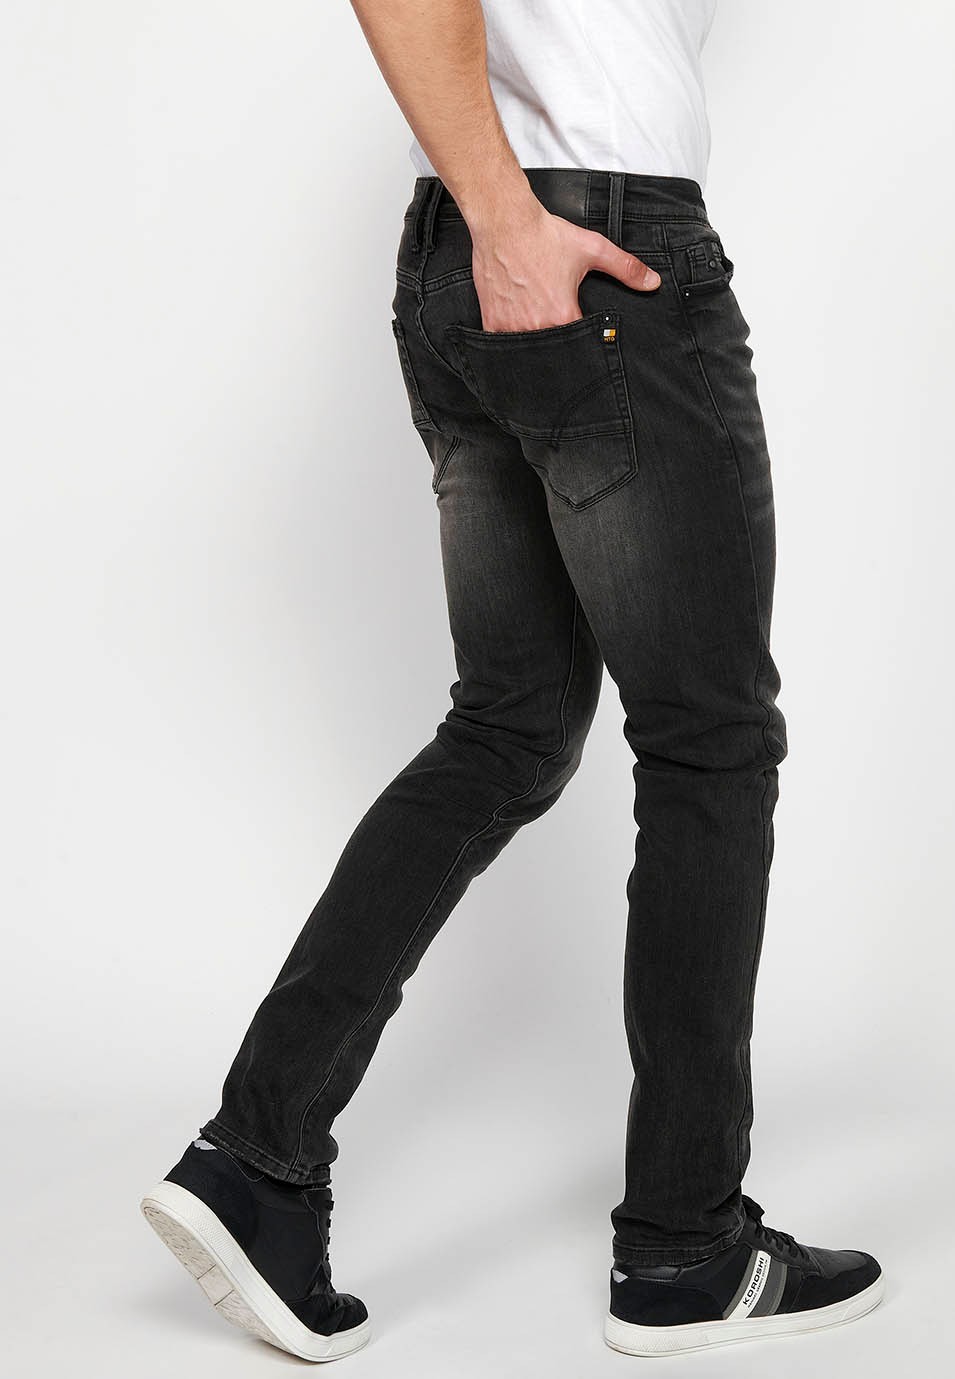 Regular fit long straight jeans with zipper and button front closure in Black Denim for Men 7